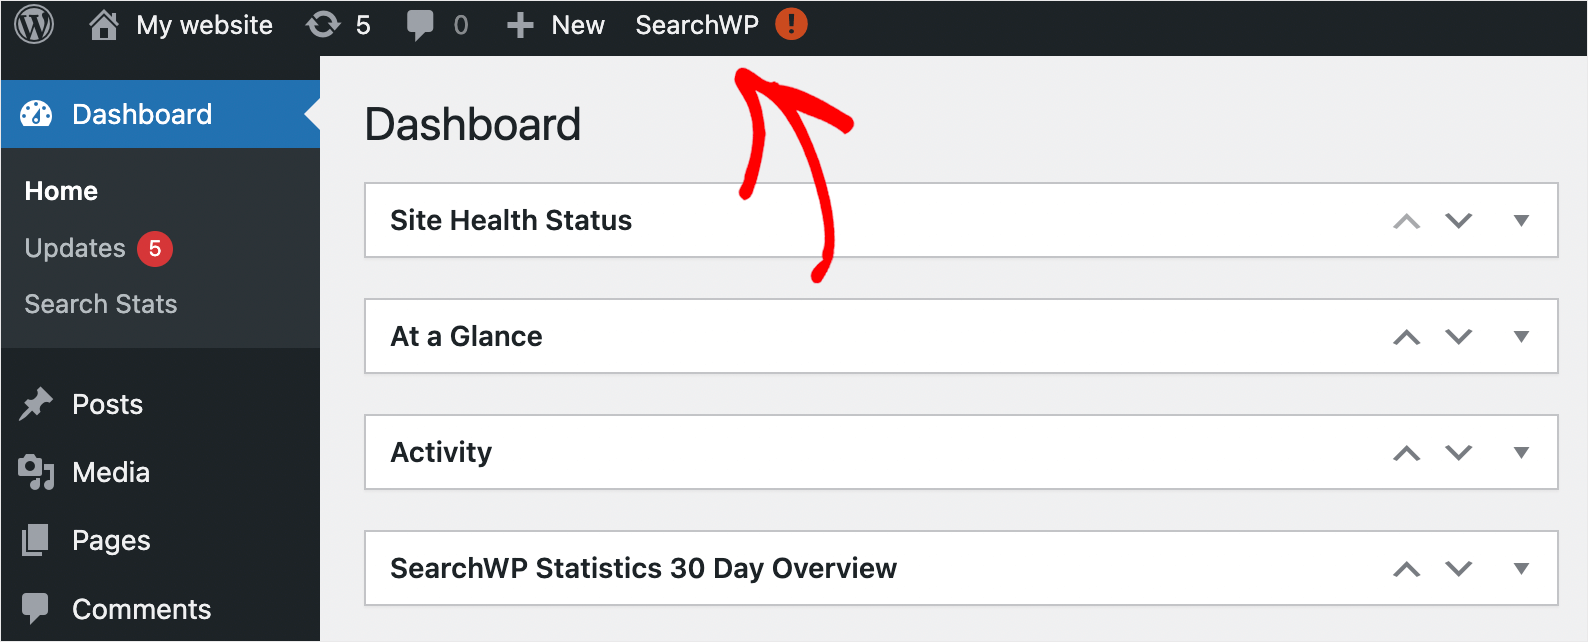 navigate to the SearchWP tab